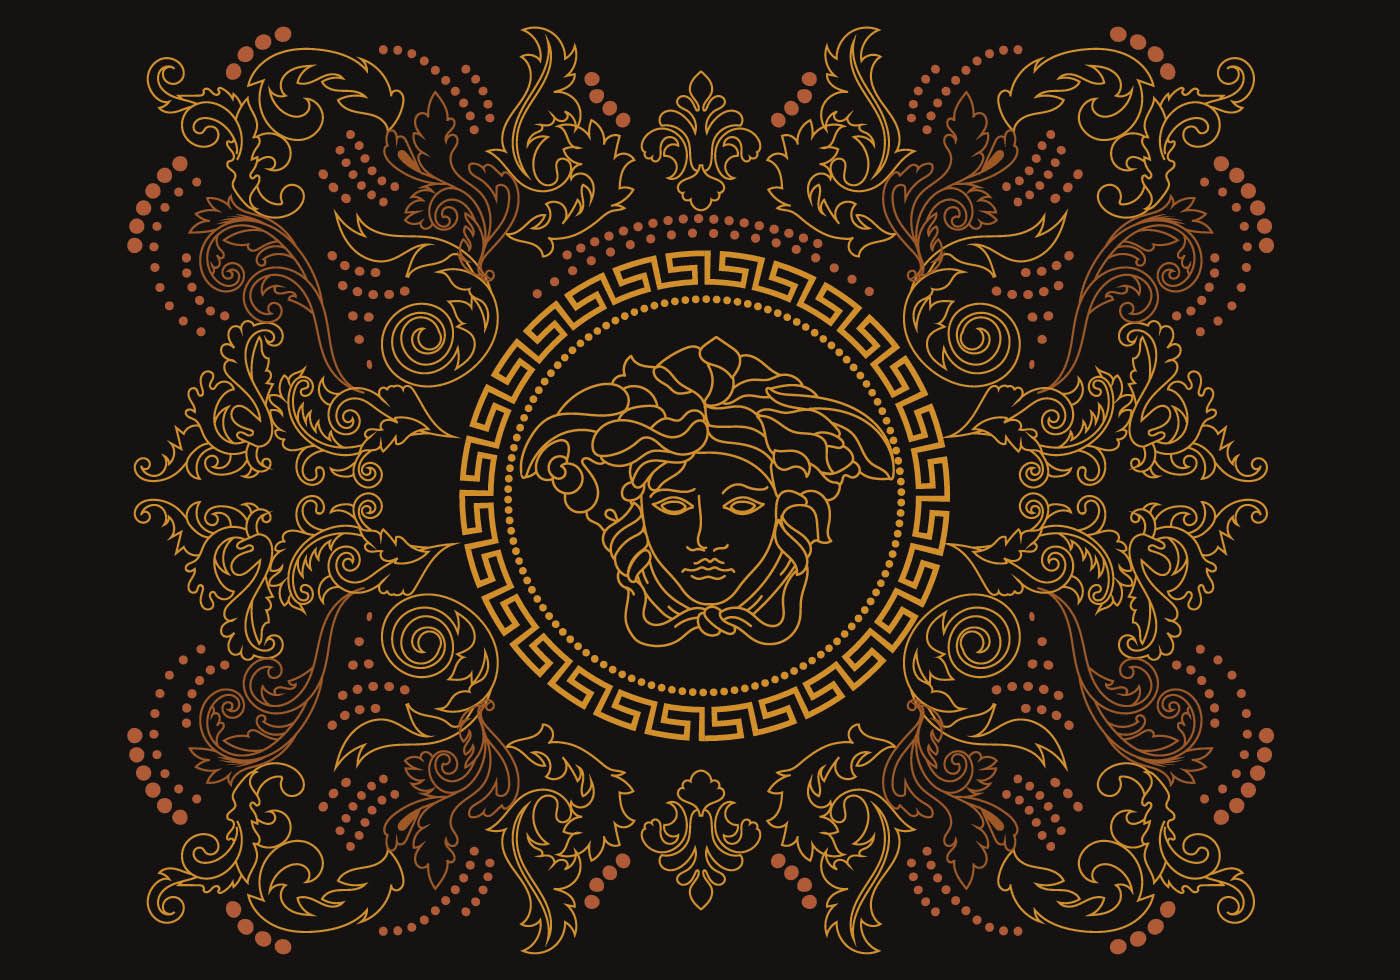 HD gucci versace wallpapers